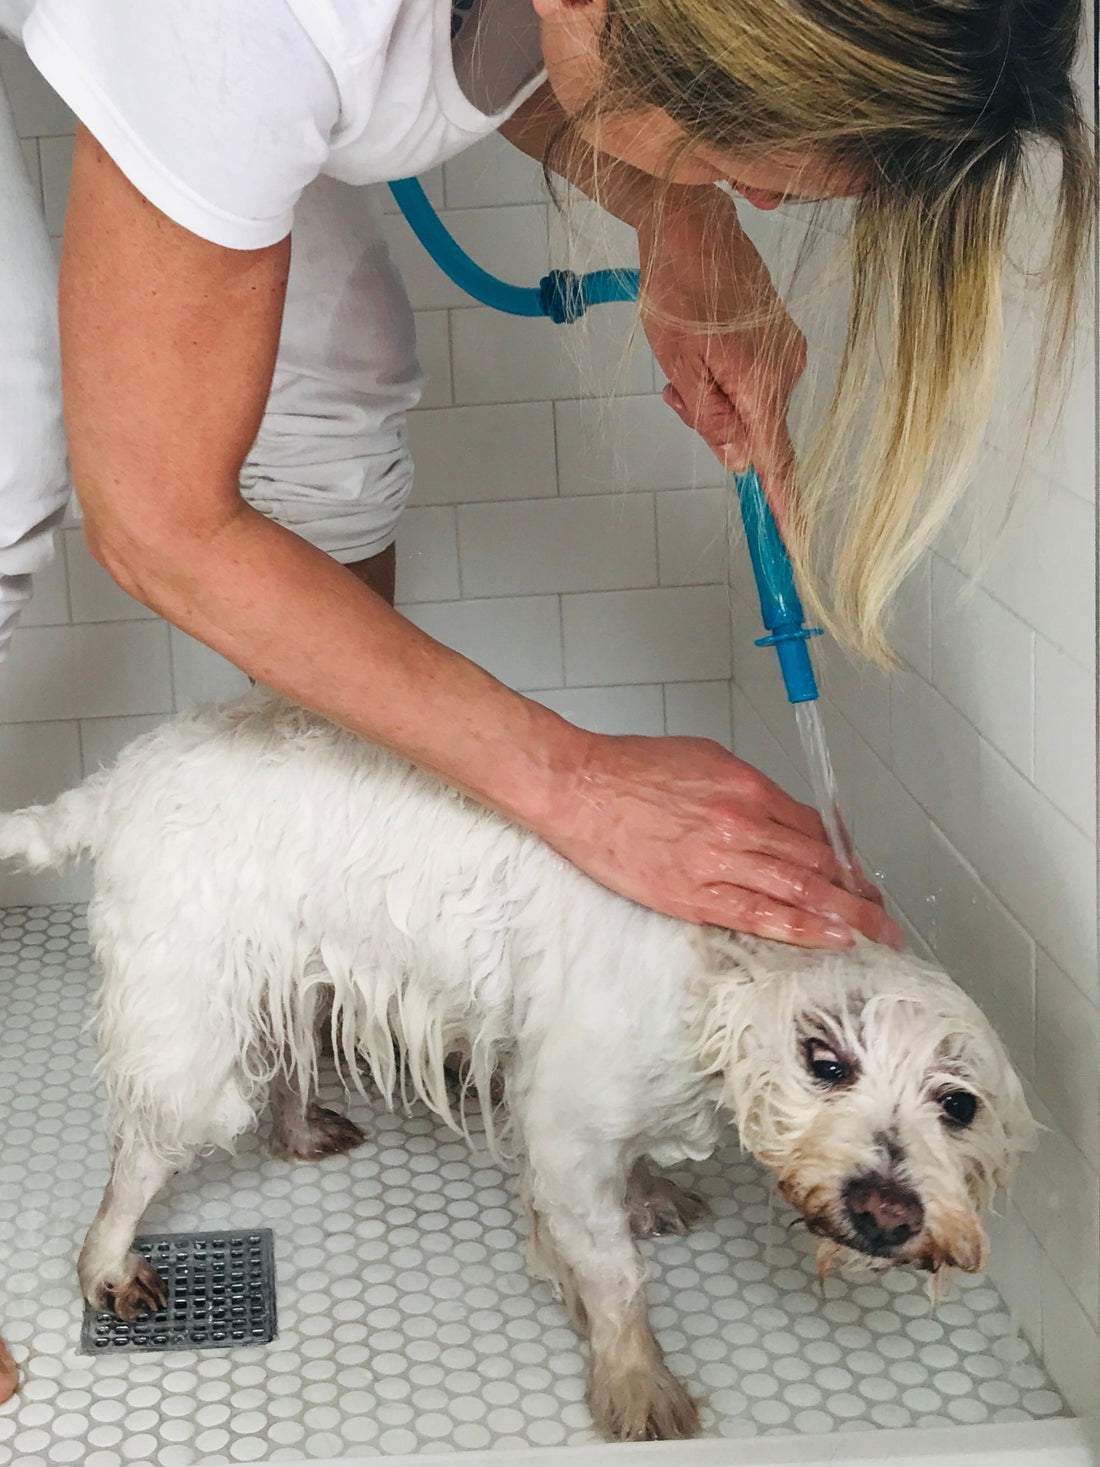 Dog Grooming Shower Head: Why Do You Need One?